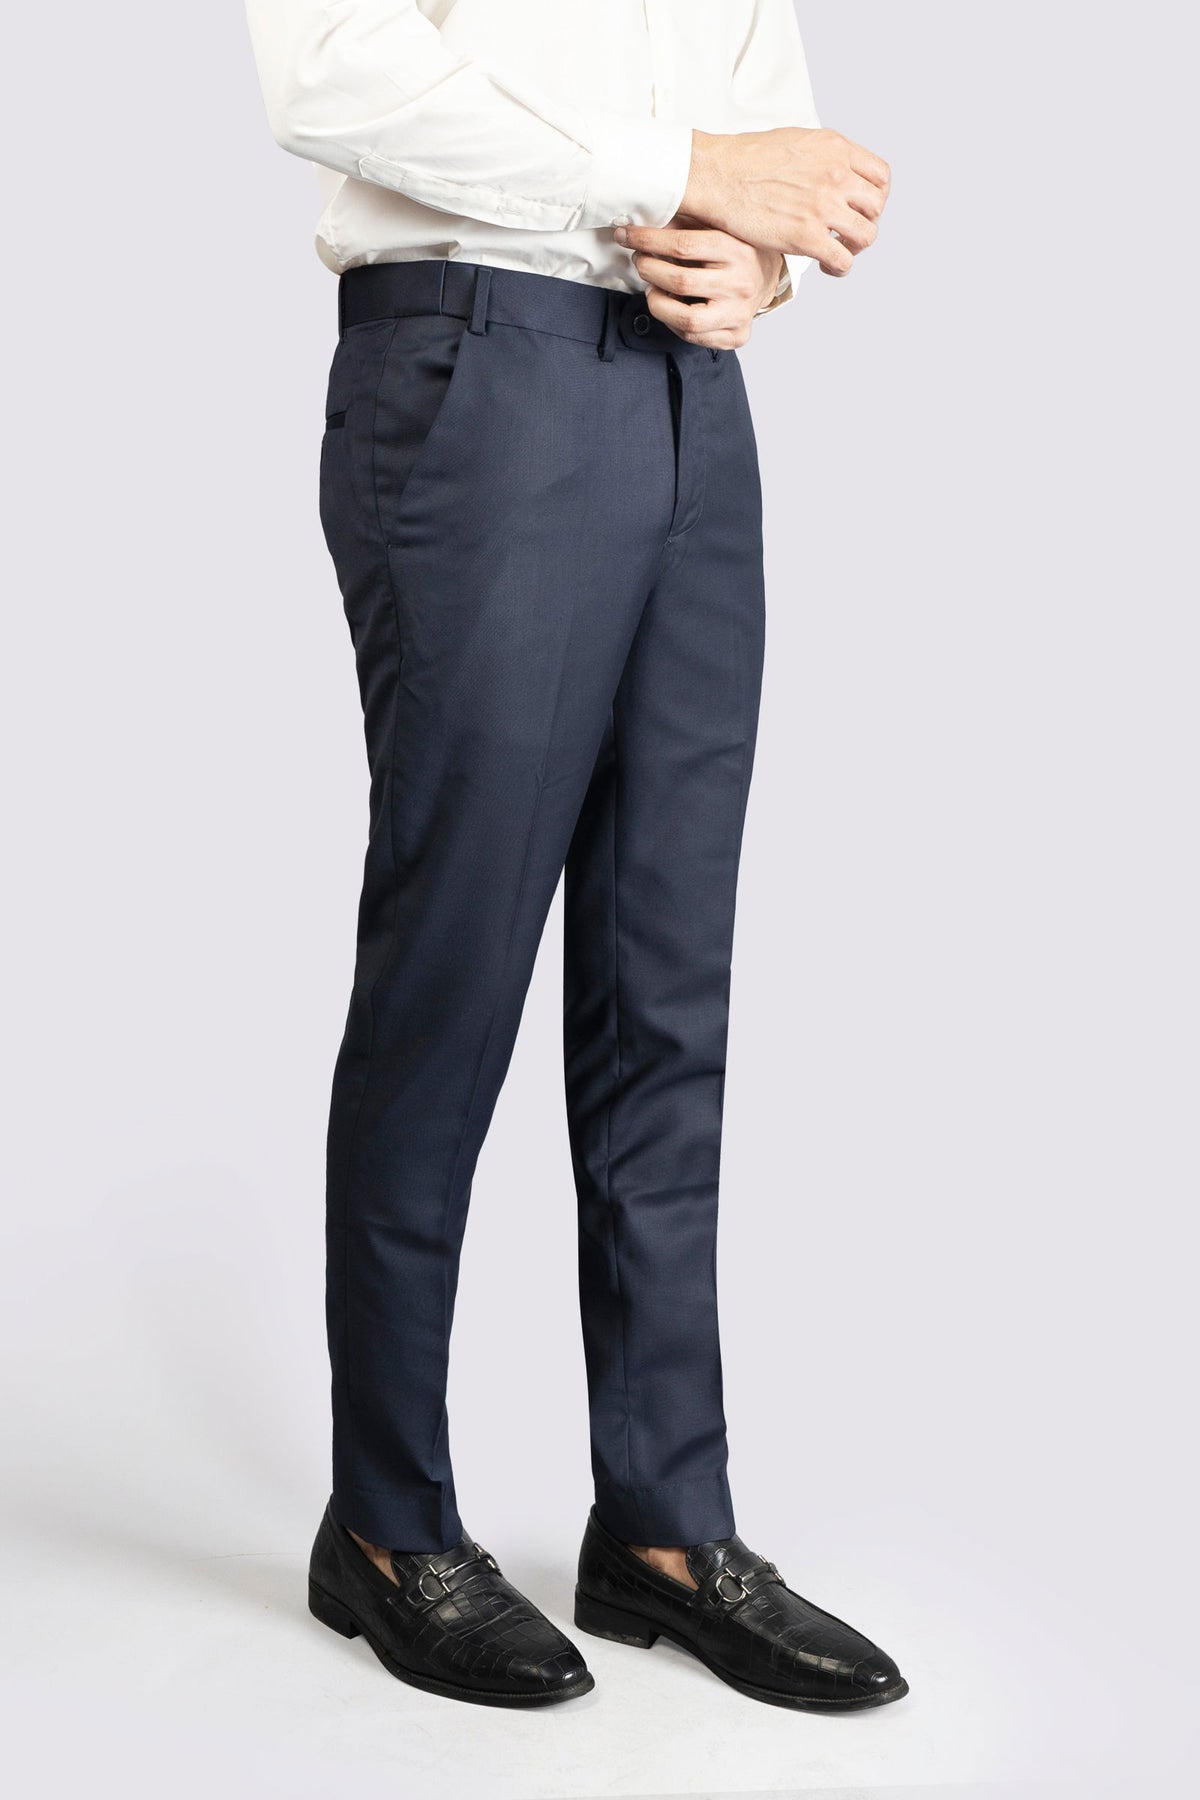 Formal Dress Navy Blue Pant - The Axis Clothing